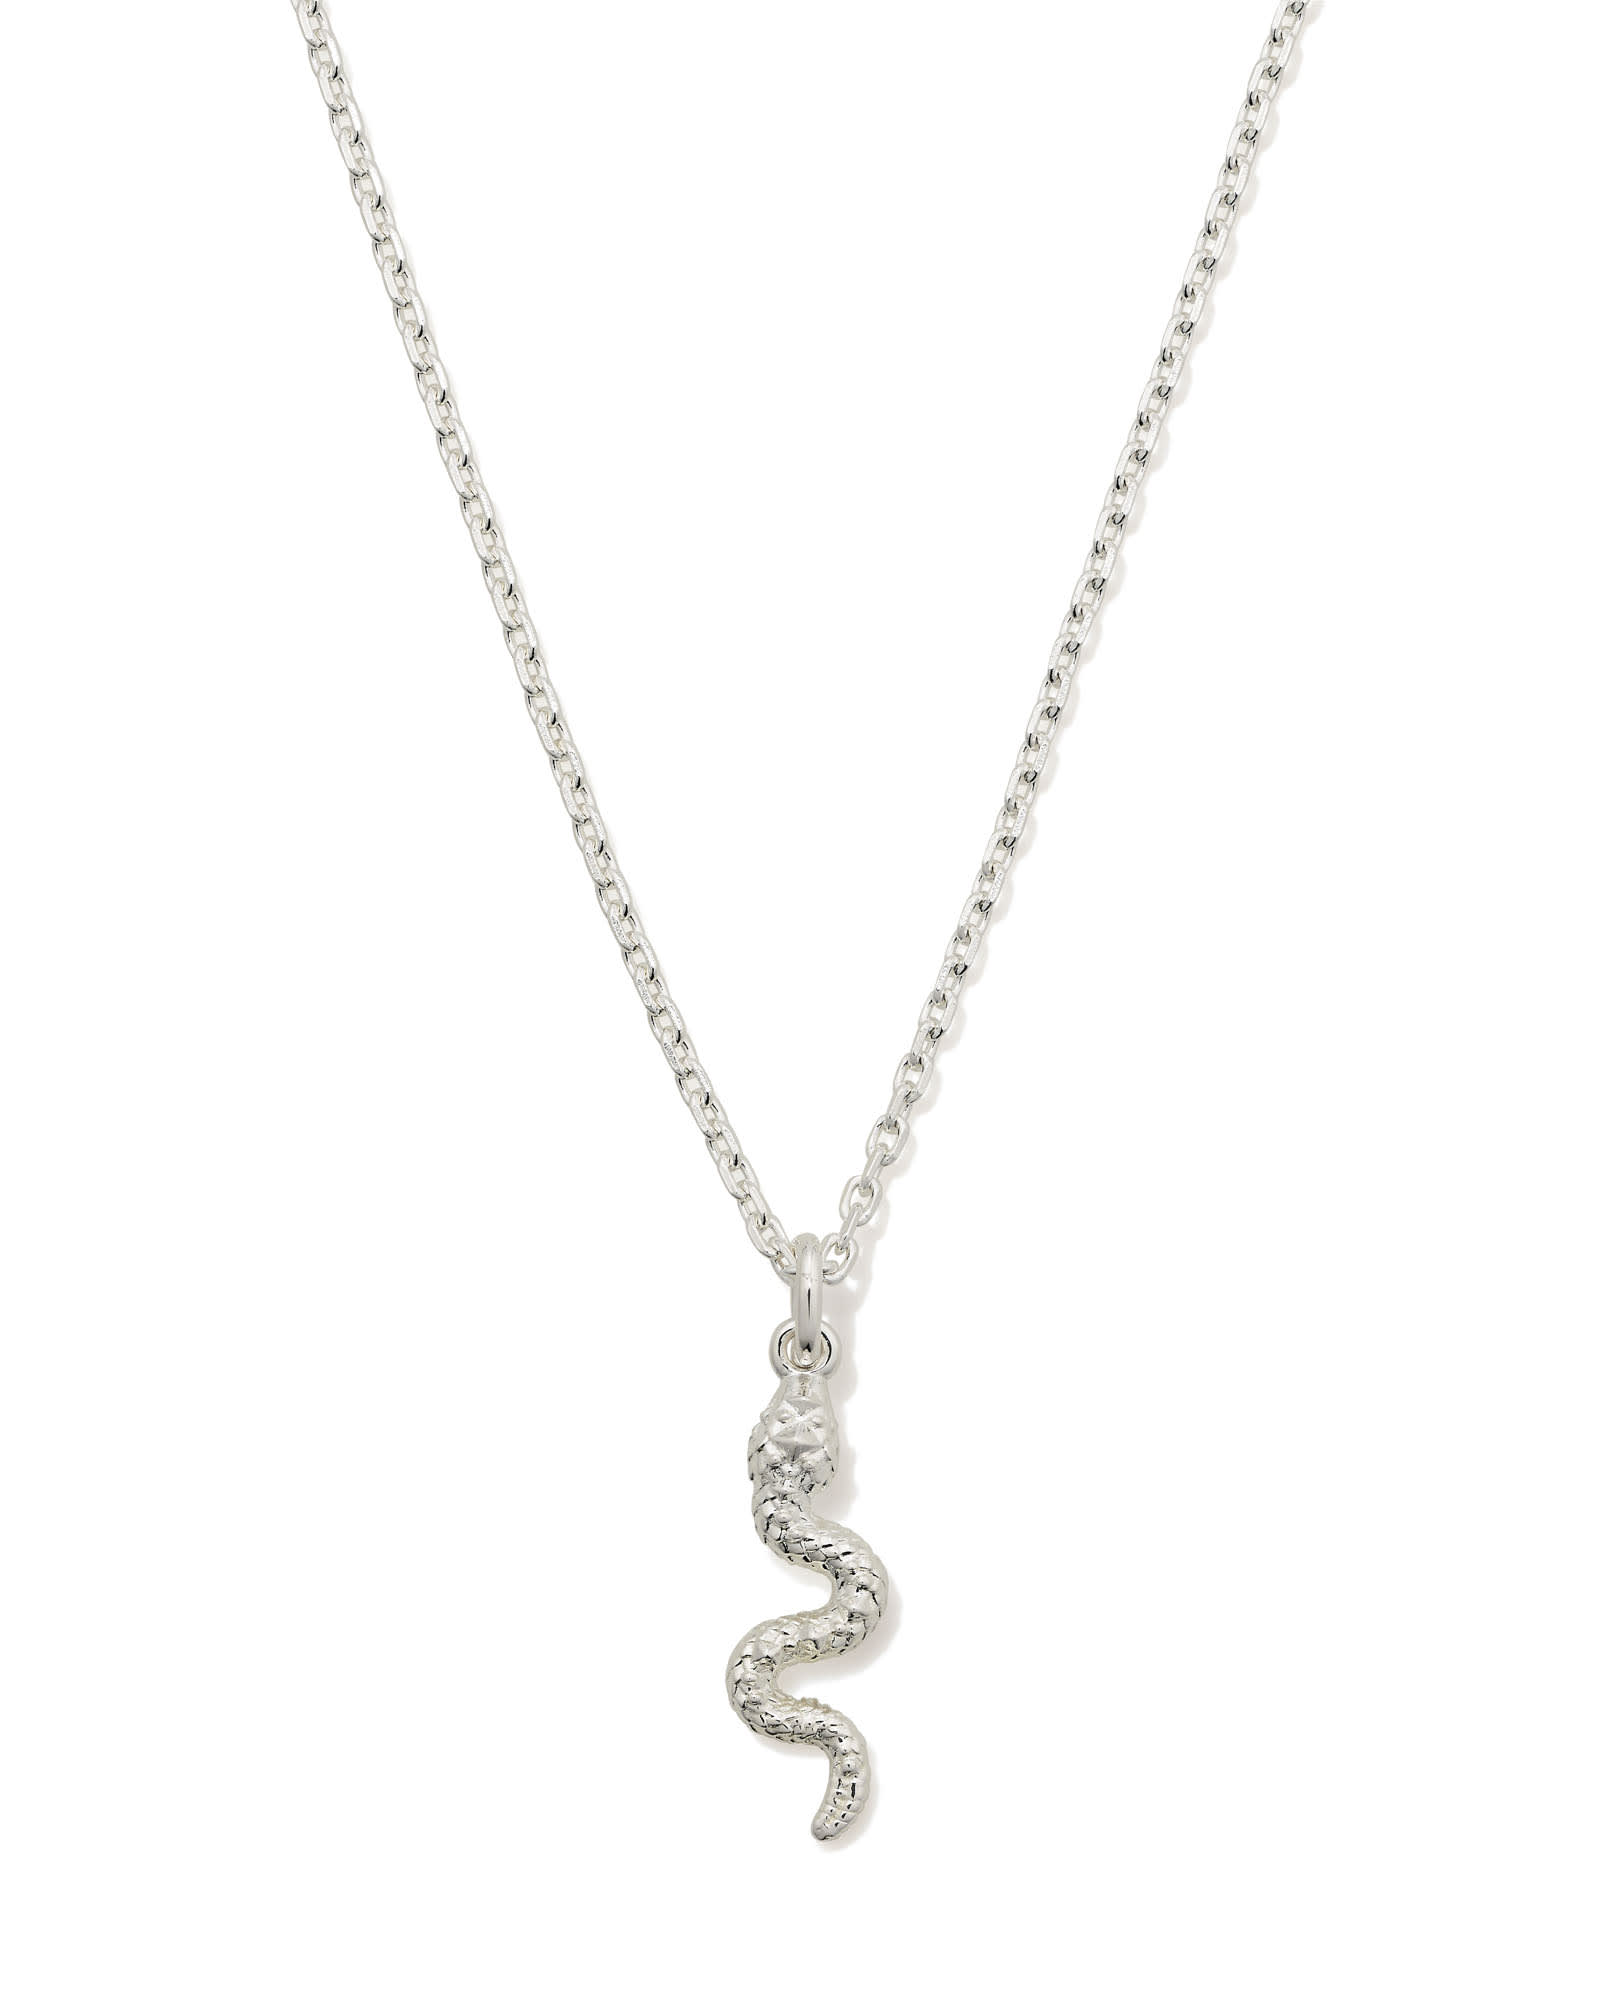 Mini Snake Pendant Necklace in Sterling Silver